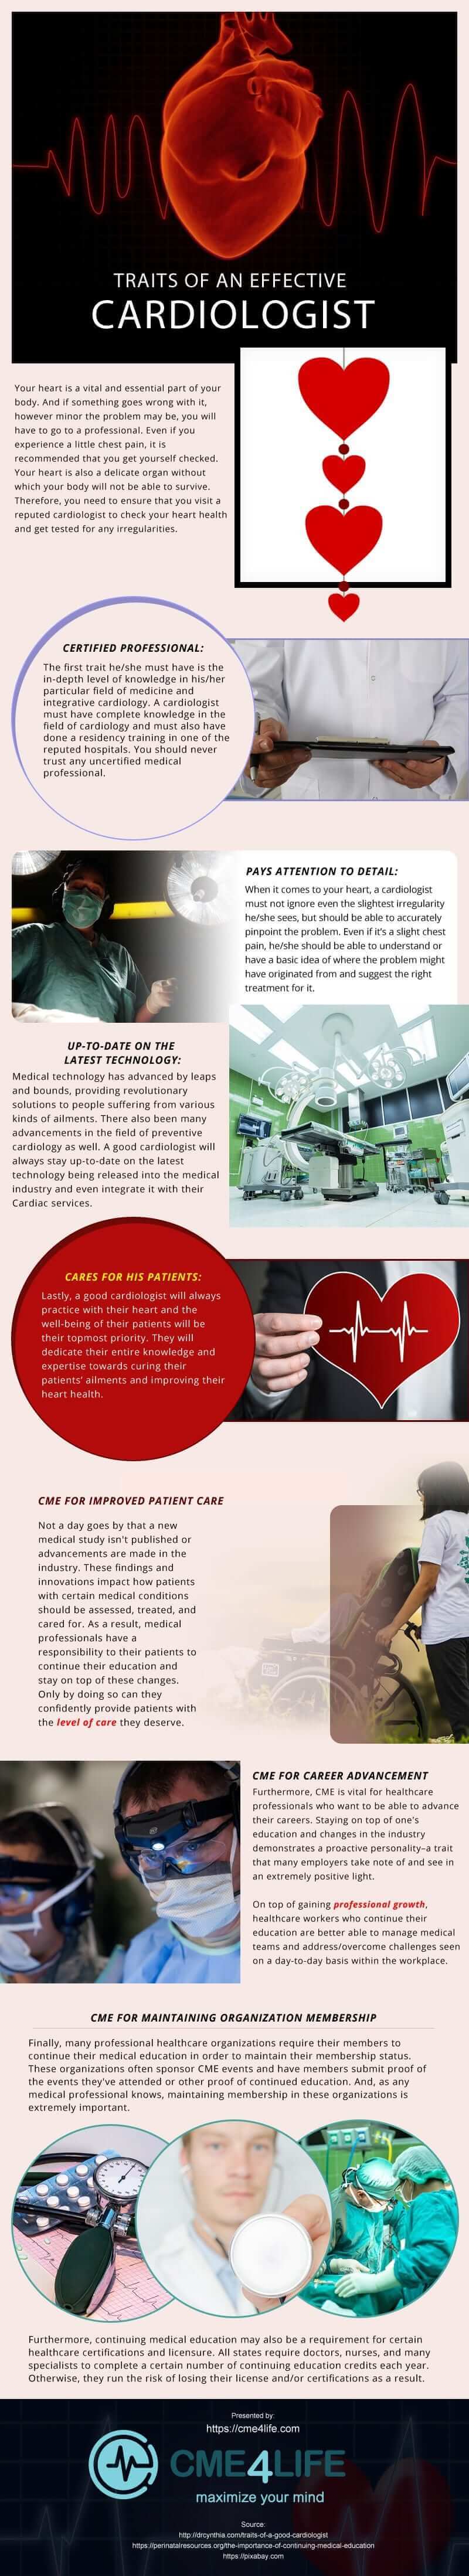 Traits of an Effective Cardiologist